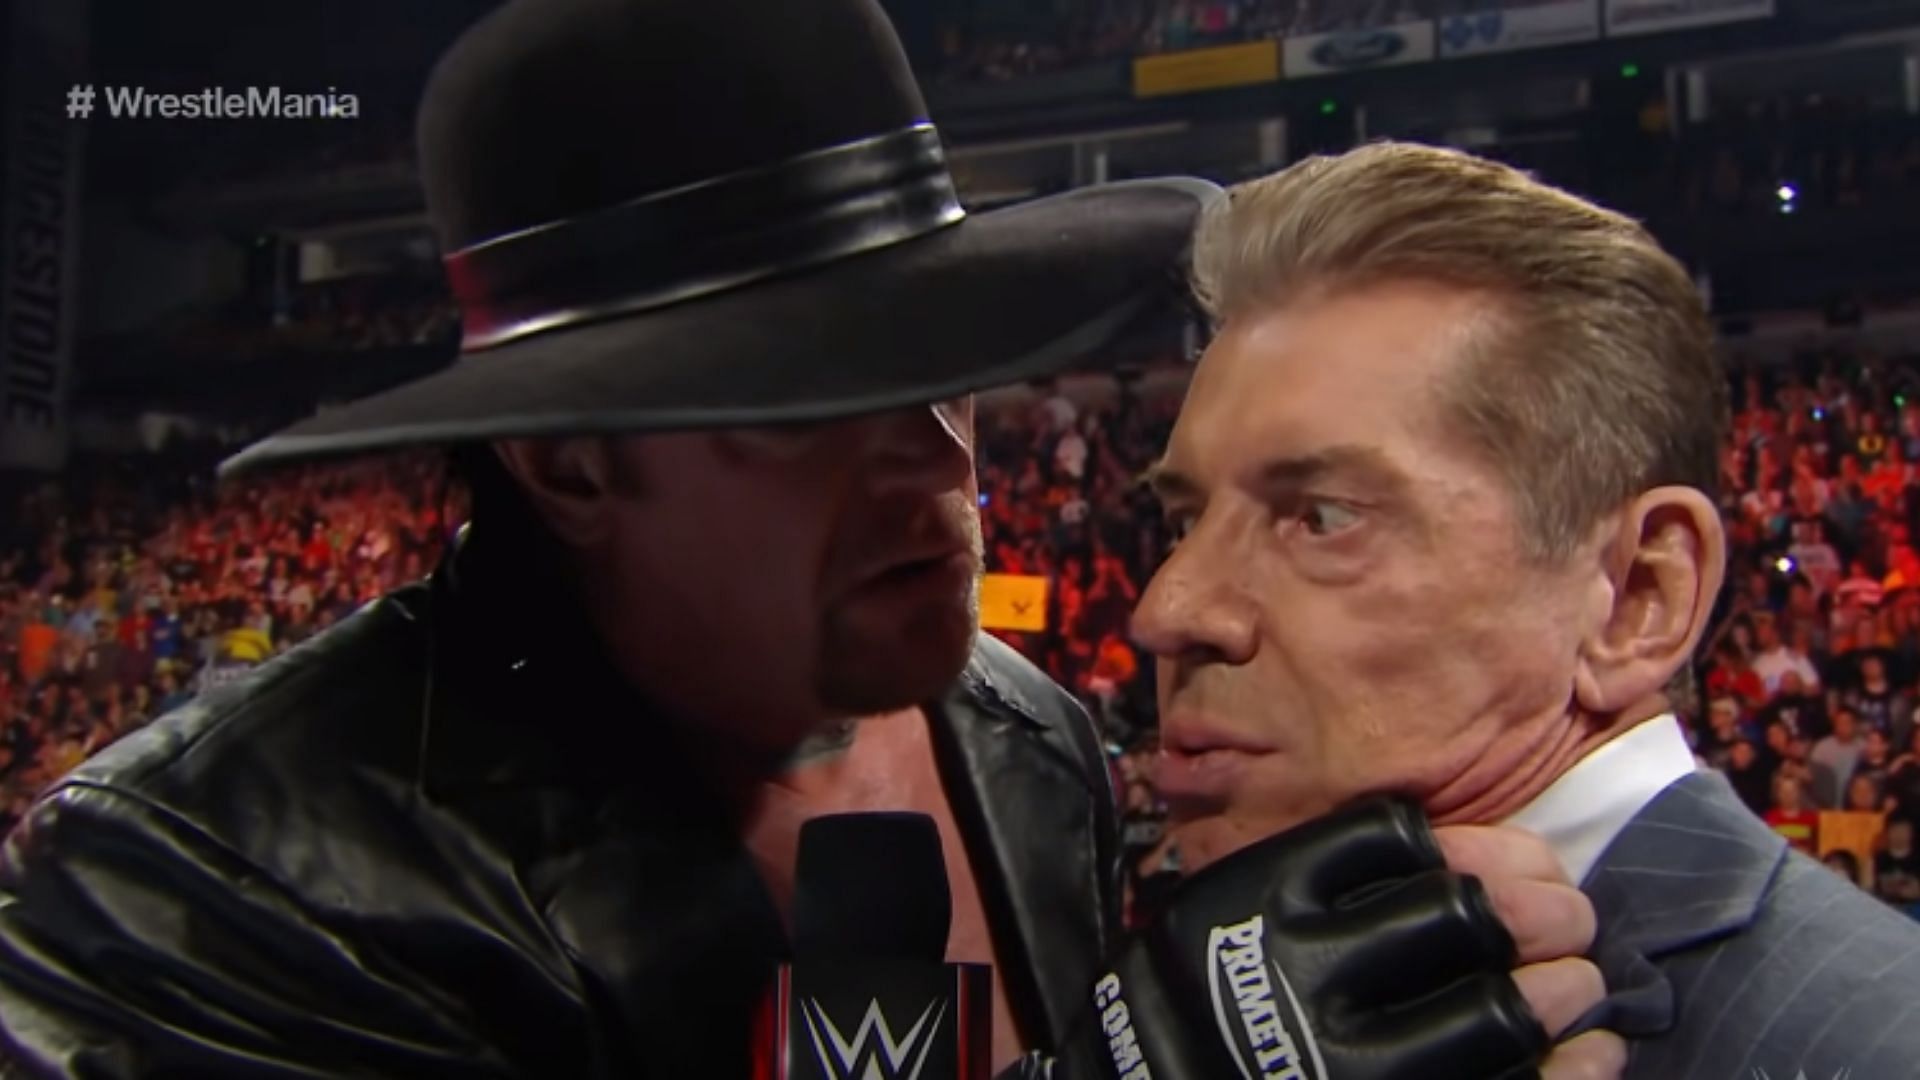 The Undertaker and Vince McMahon on WWE RAW in 2016